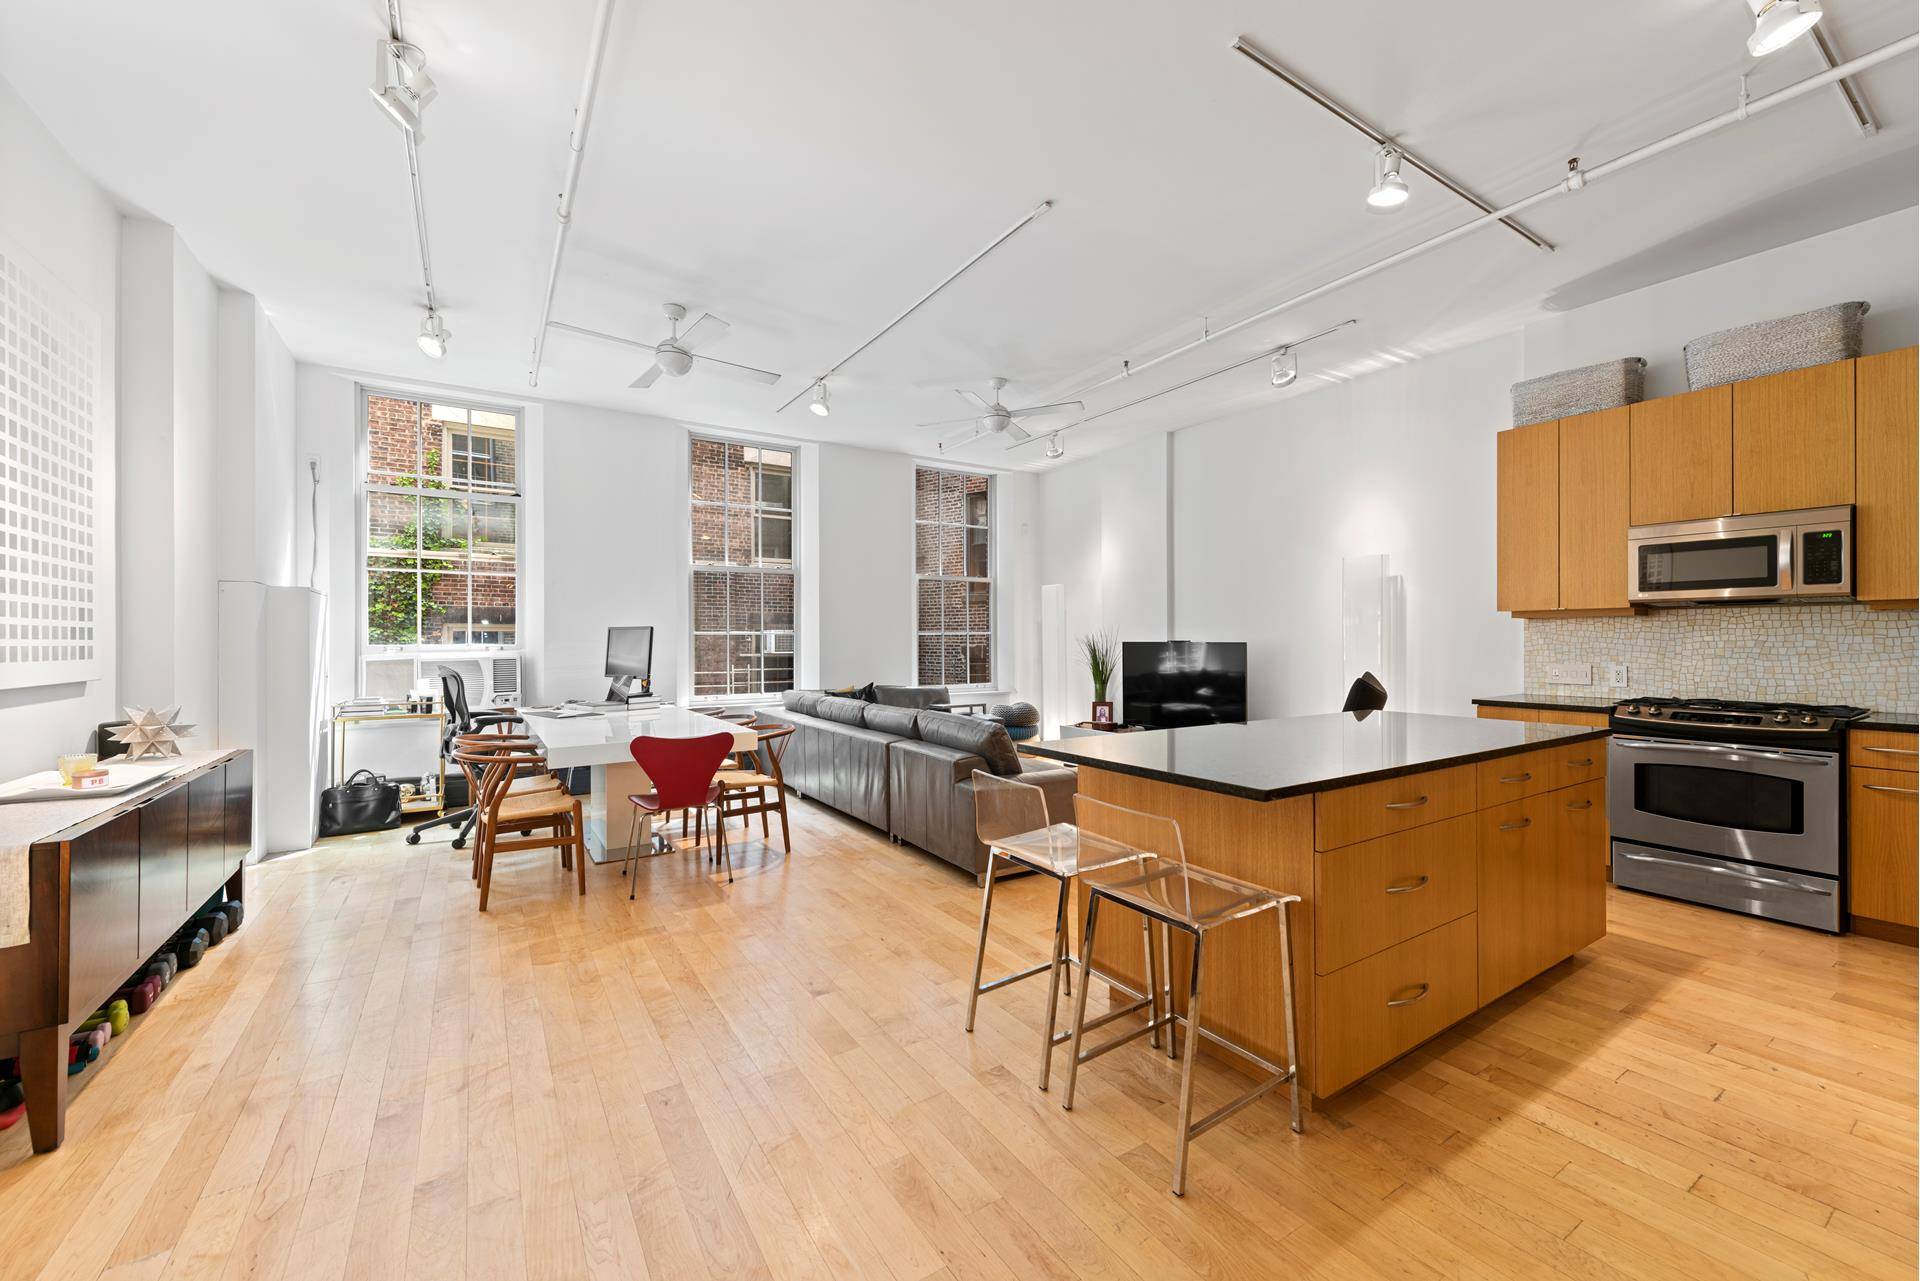 Fully renovated 1, 400 square foot loft with high ceilings and exposed brick in the historic, four unit building 182 Duane Street, located across from Duane Park on the most ...